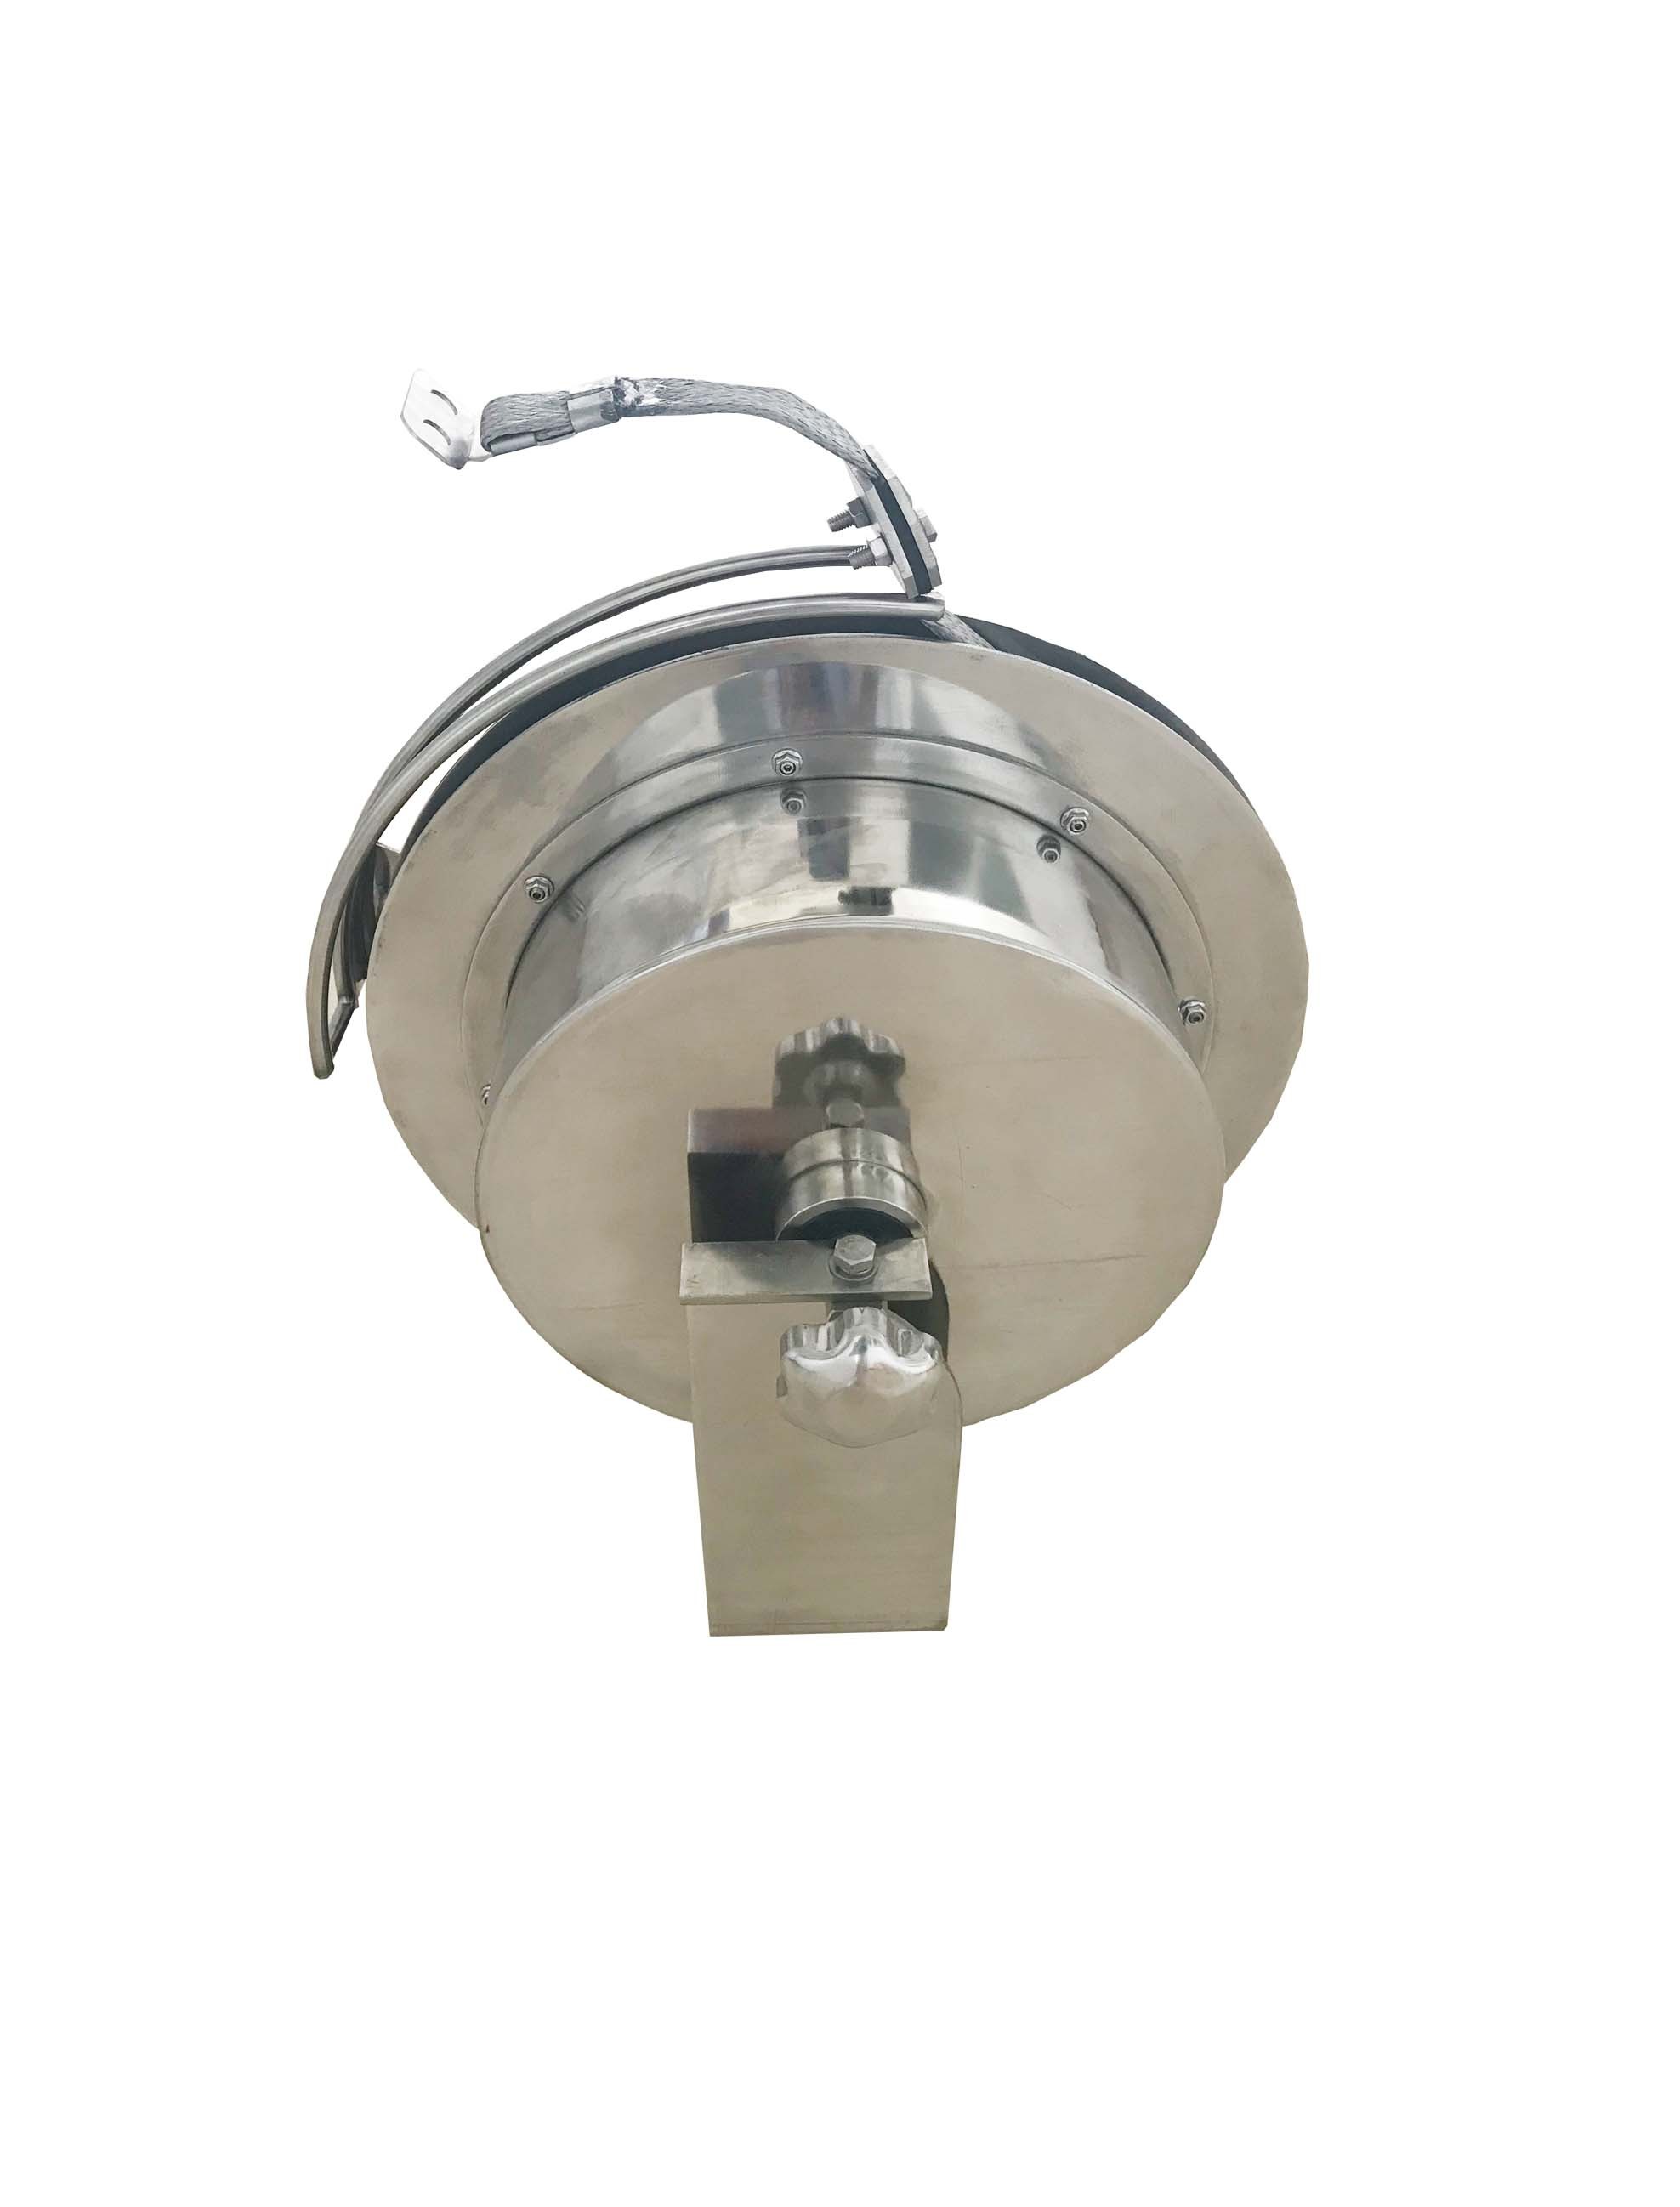 Retractable Grounding Reel for floating roof tanks 